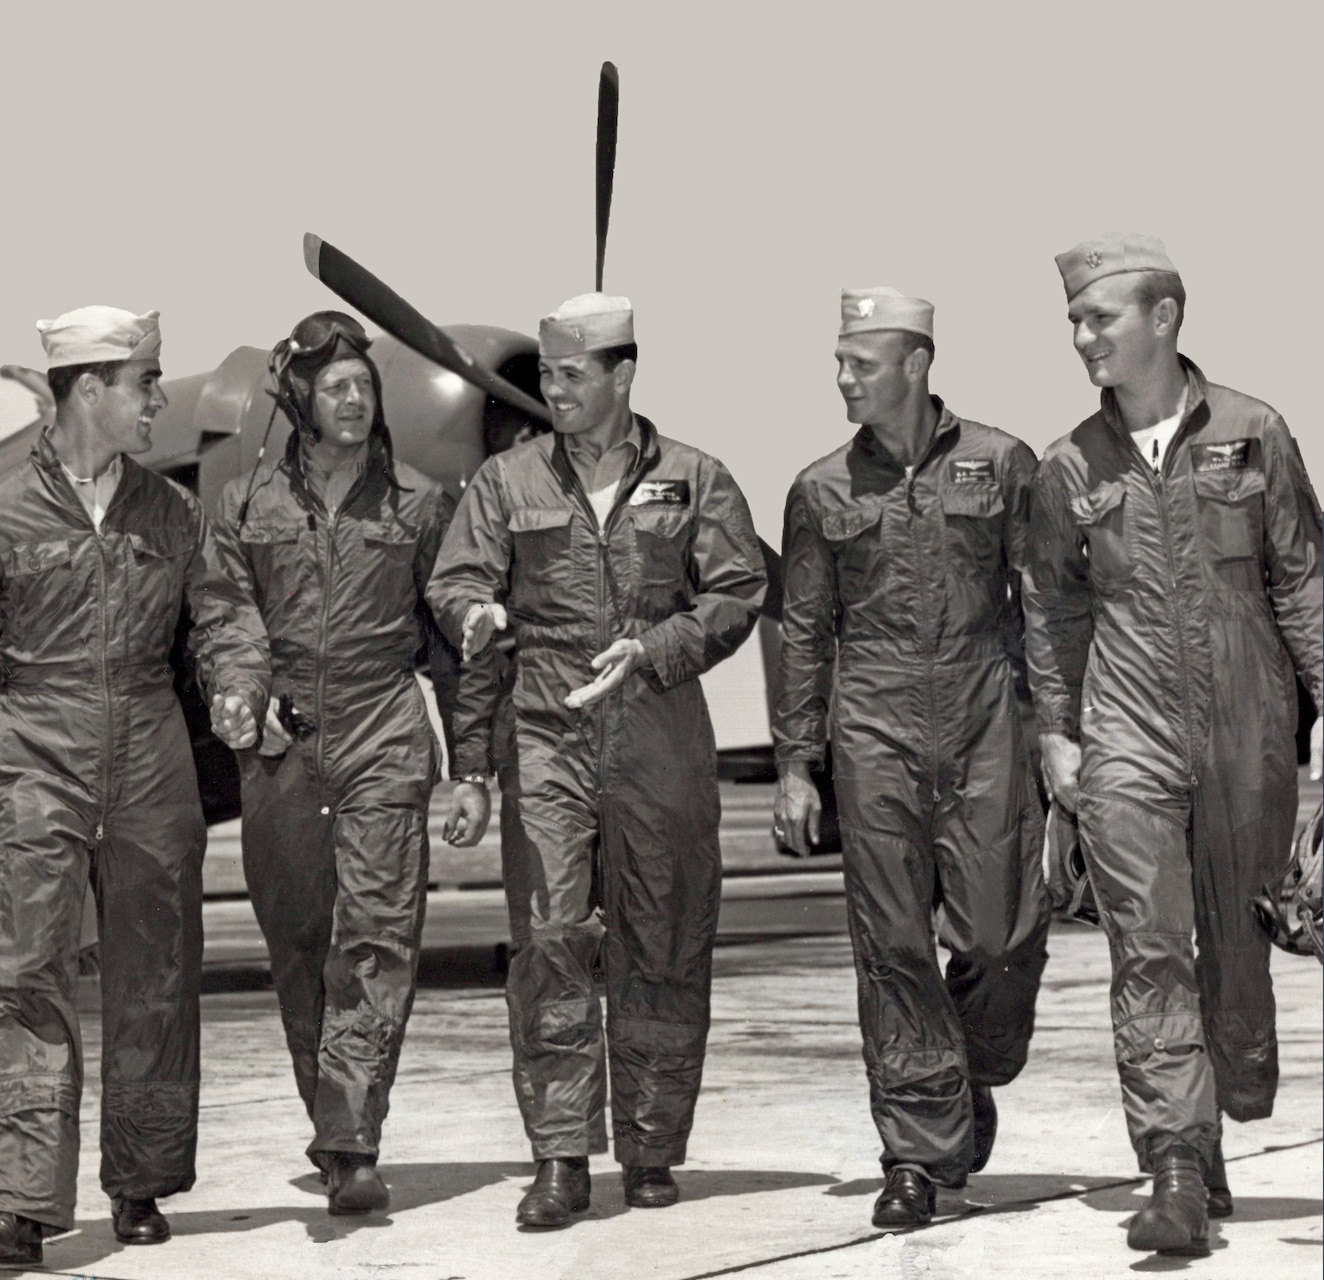 The 1947 team walks the flight line at Floyd Bennett Field, New York. In the background is one of their F8F Bearcats, arguably one of the smallest yet most powerful single piston-engine fighters to ever fly from a U.S. carrier, too late to combat Japanese kamikazes. From left is Lt. Bob Thelen, Lt. Chuck Knight, Lt. Cmdr. Bob Clarke (OINC), Lt. Cmdr. R.E. “Dusty” Rhodes, Lt. jg. Billy May.